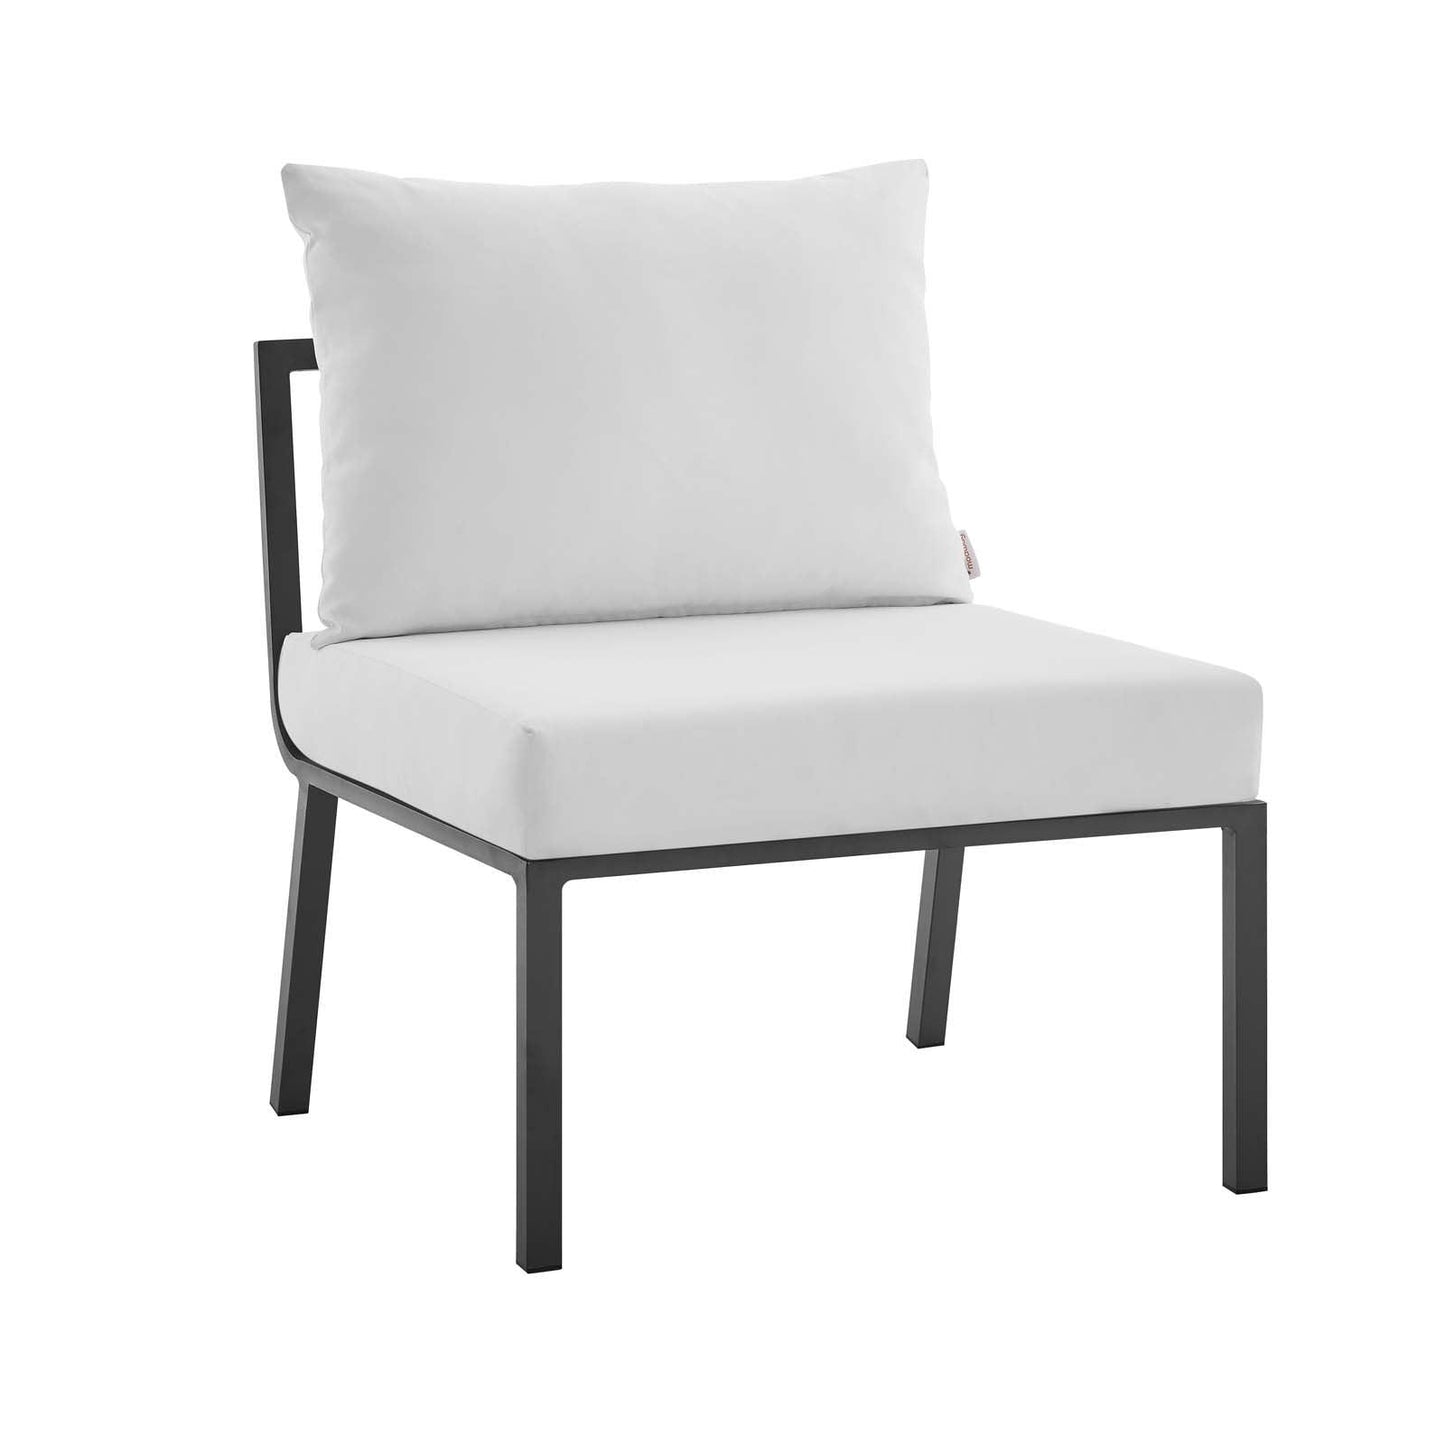 Modway Riverside Outdoor Patio Aluminum Armless Chair FredCo